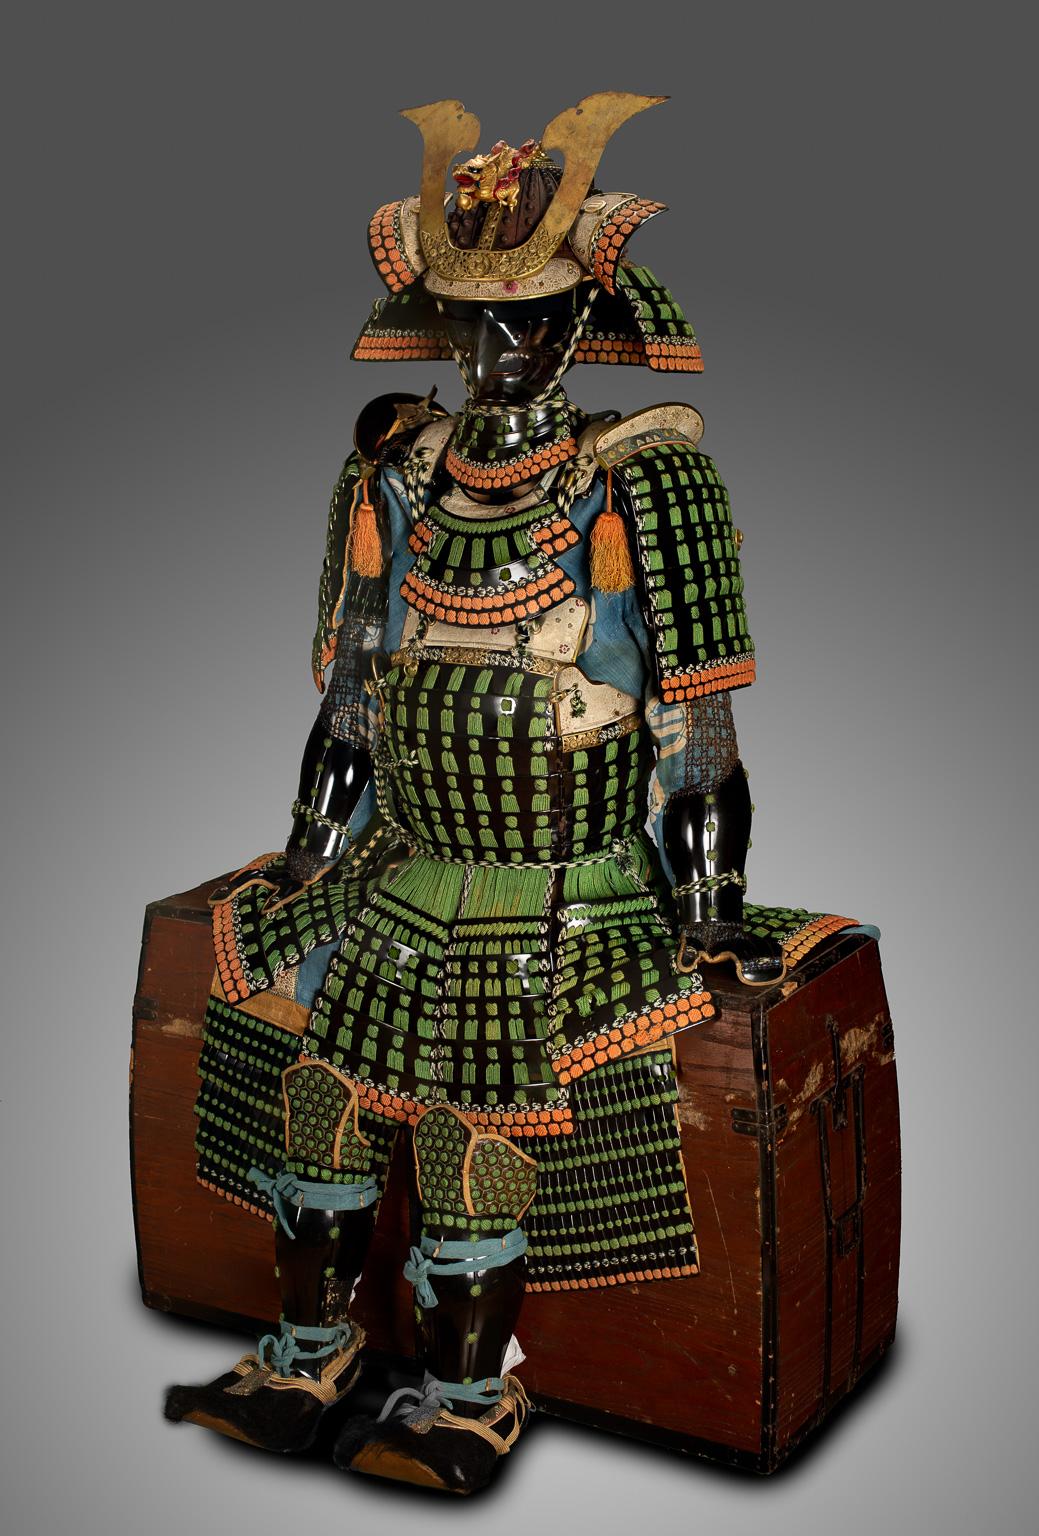 This samurai armor, on its helm and liner, exhibits a mokko-type family crest in an original variation. It has probably belonged to a daimyo of a minor province, perhaps related to the Takigawa clan, which would employ kamon very similar to this